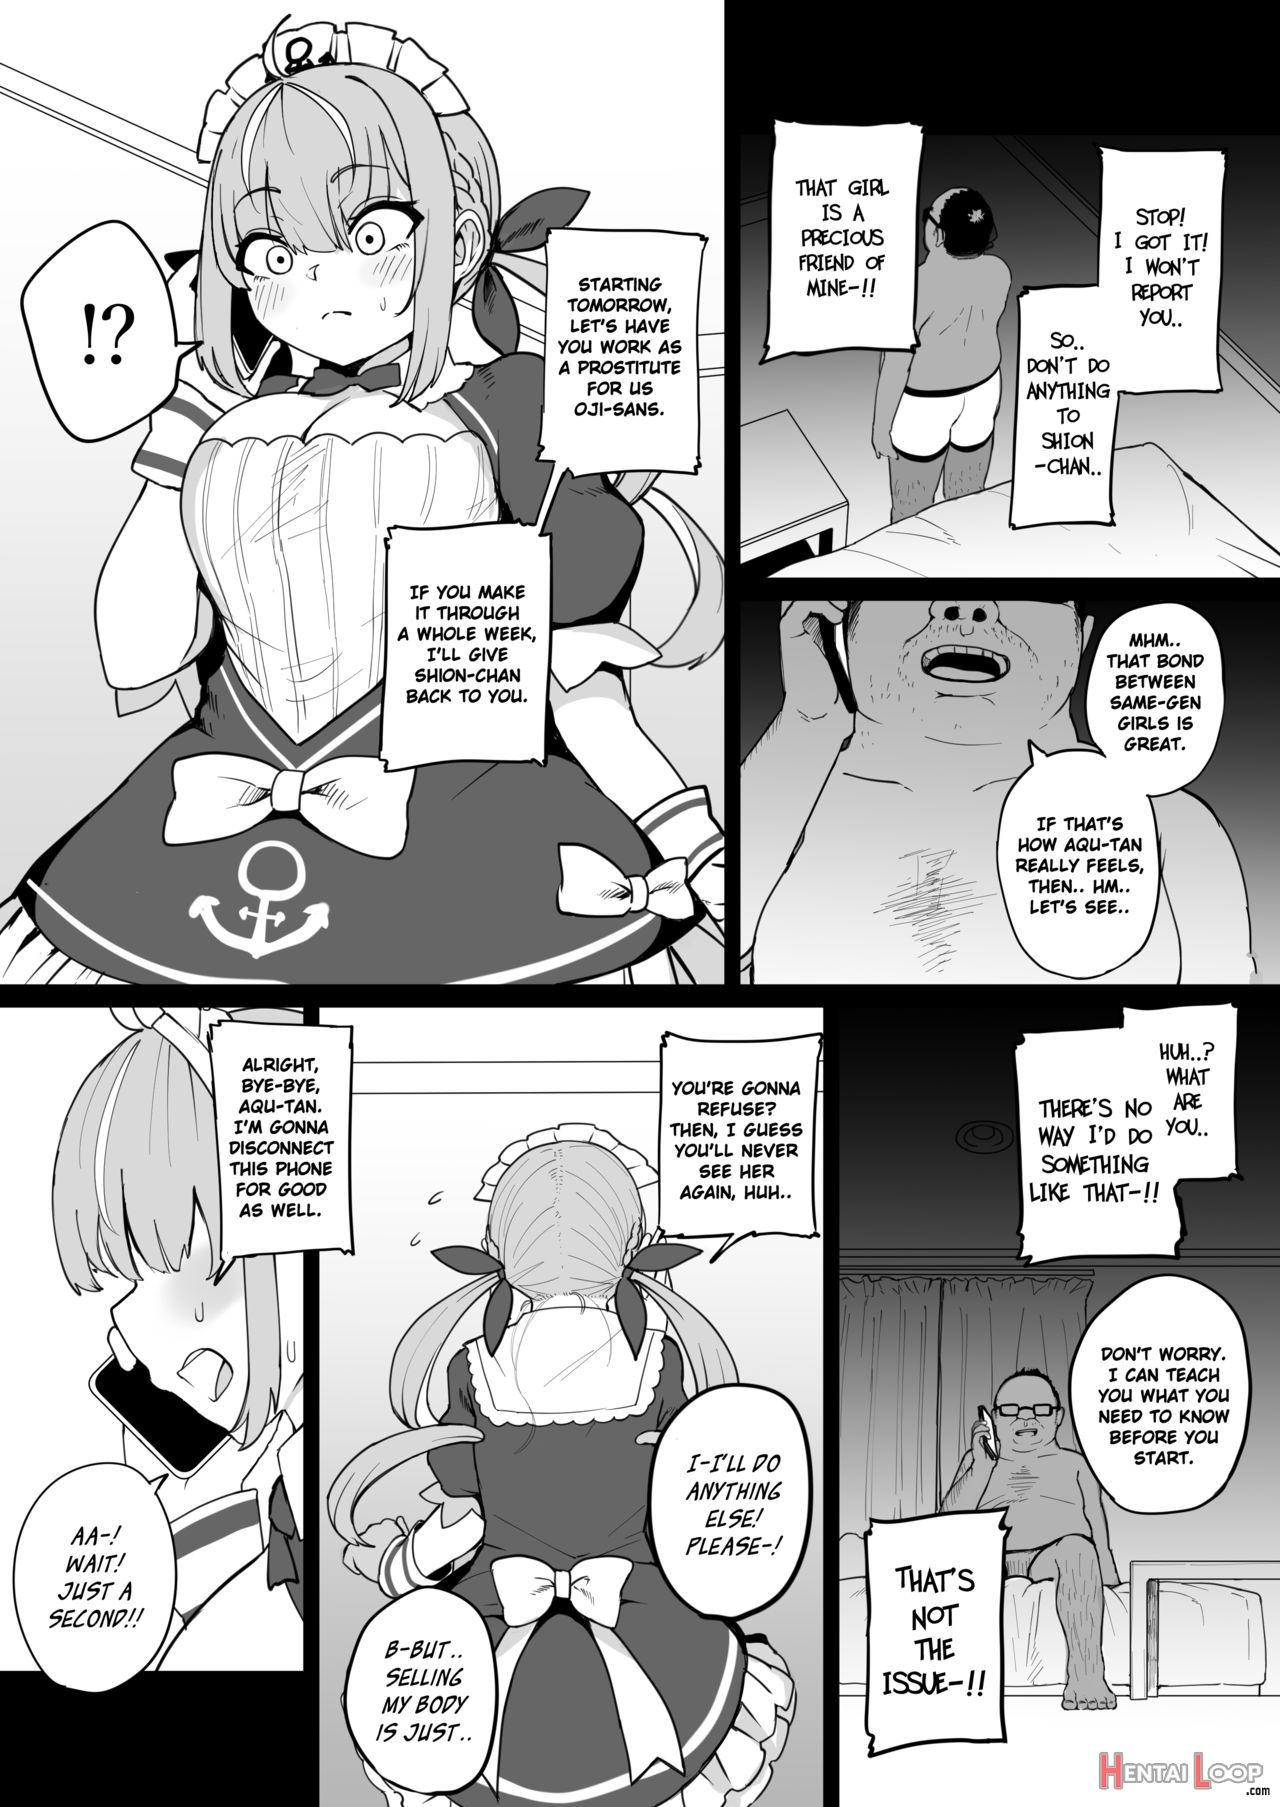 Aqua-chan, For Her Friend's Sake page 6